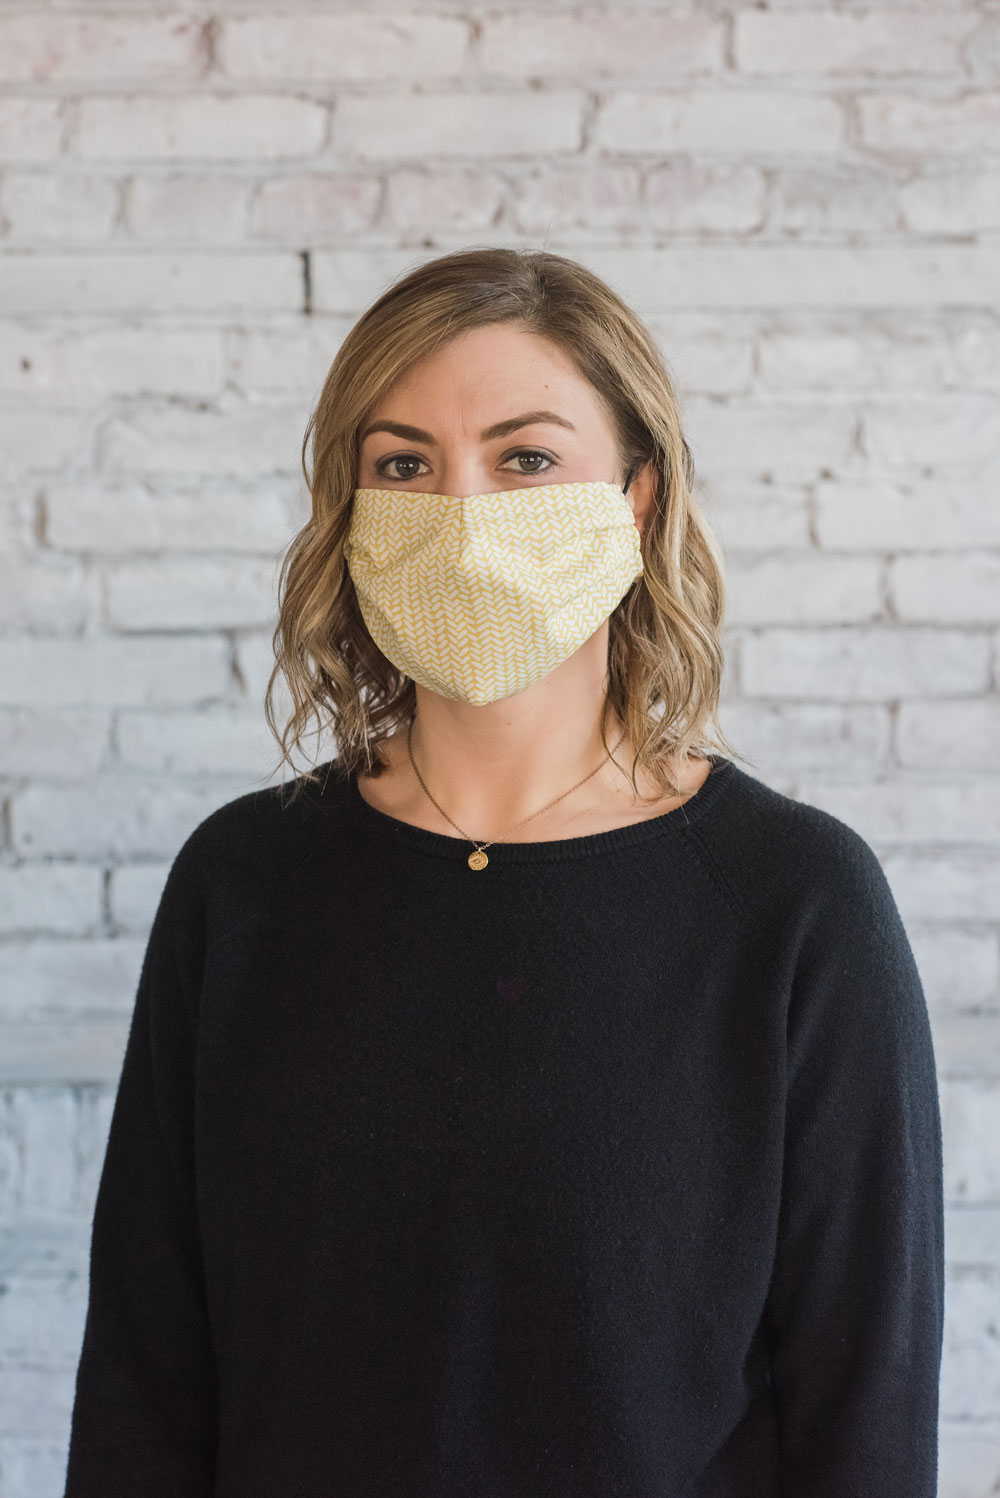 Our current global pandemic has created a shortage of medical masks. This free pattern with video explains how to sew a protective face mask with fabric. suzyquilts.com #facemaskpattern #sewfacemask